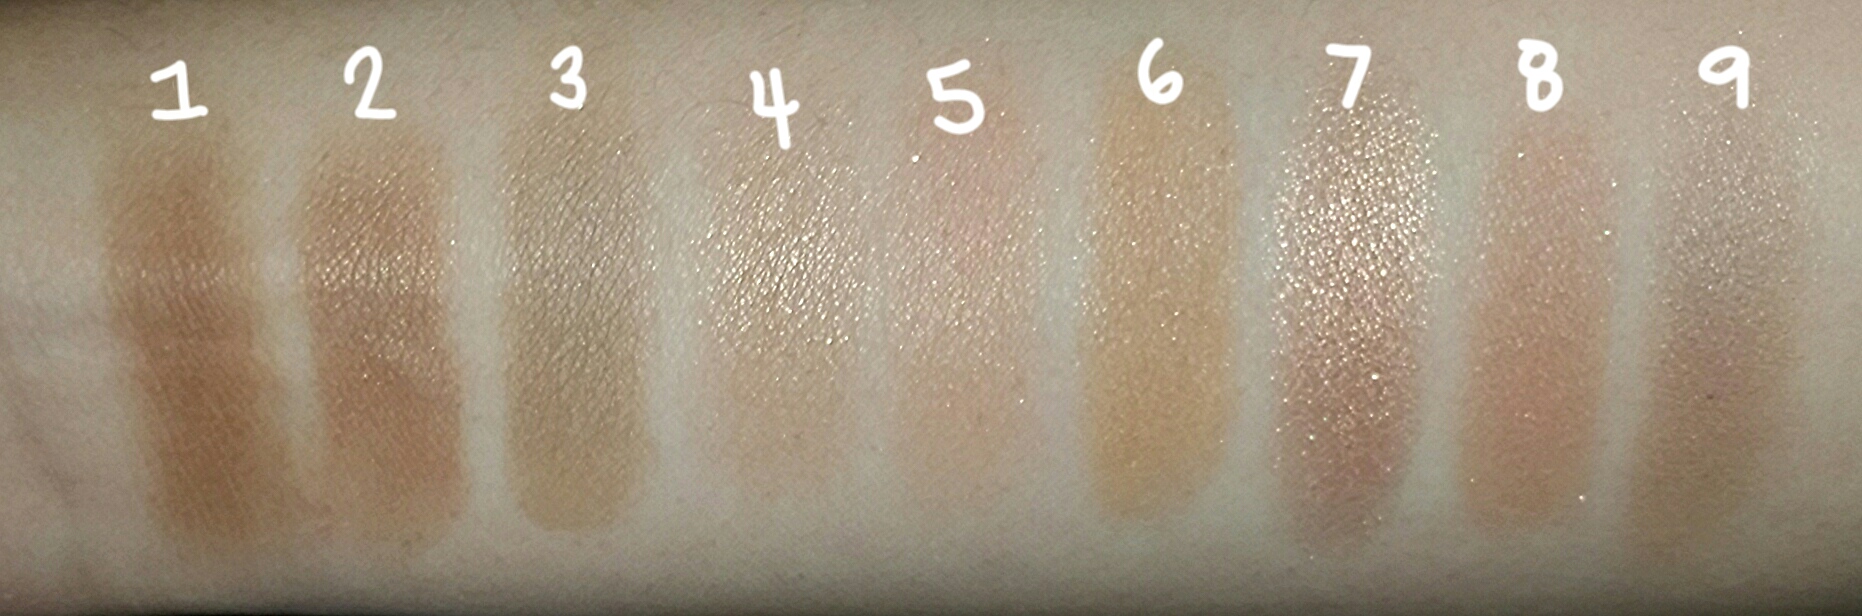 Tigge mikrocomputer lige ud Re: Bronzer Swatches - Beauty Insider Community